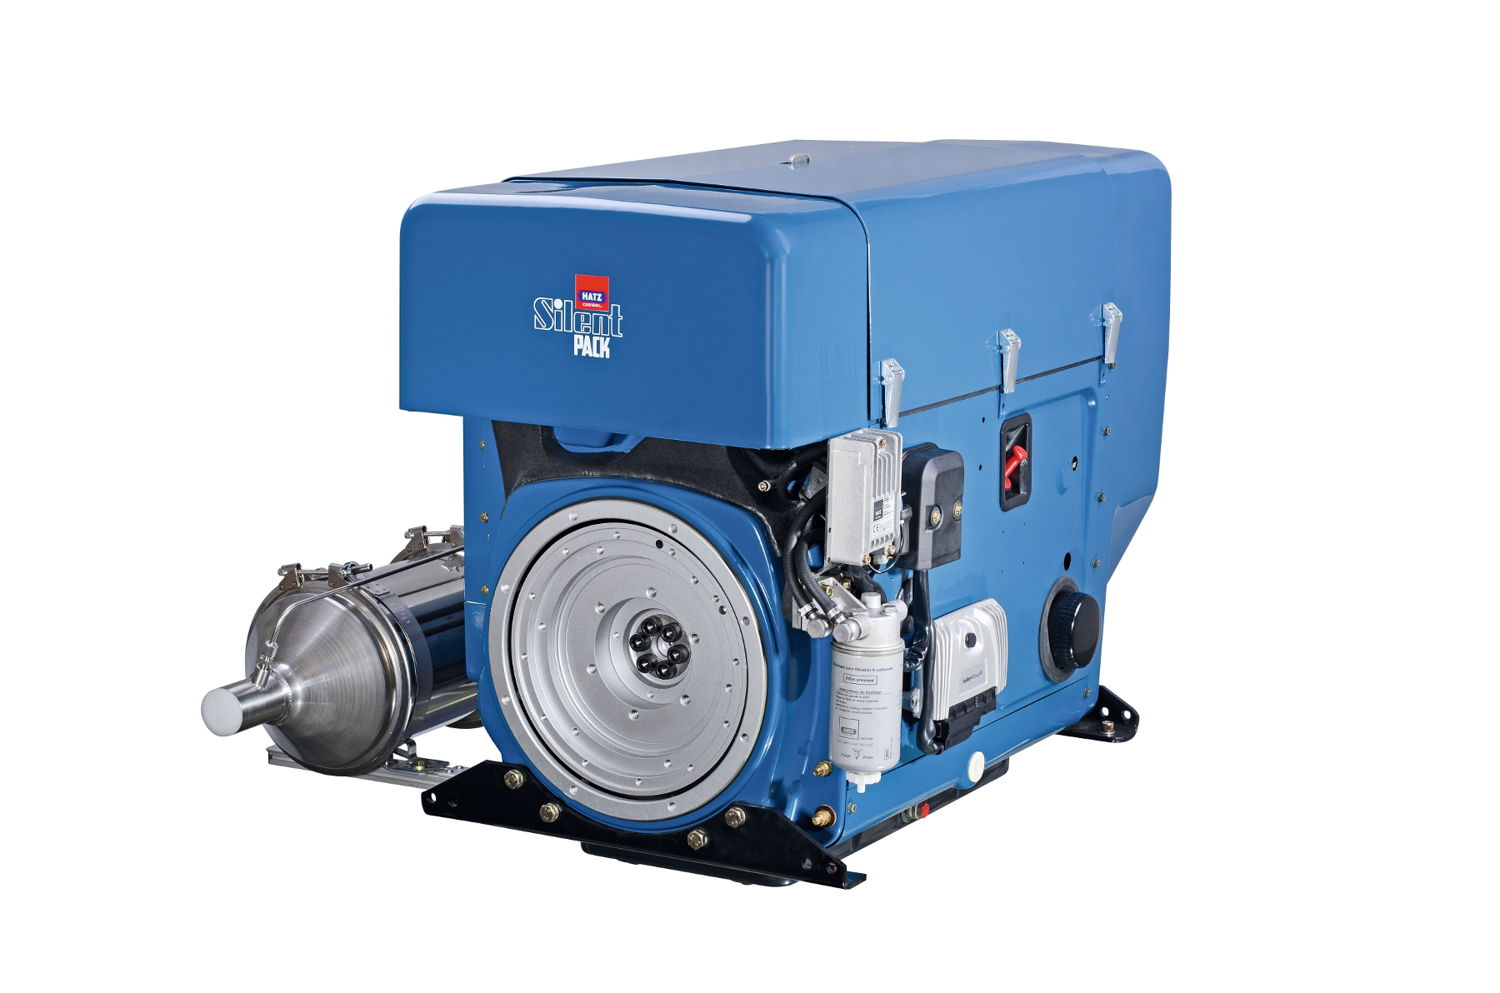 Air-cooled Hatz 4L43C diesel engine for industrial use equipped with particulate filter and exhaust gas recirculation